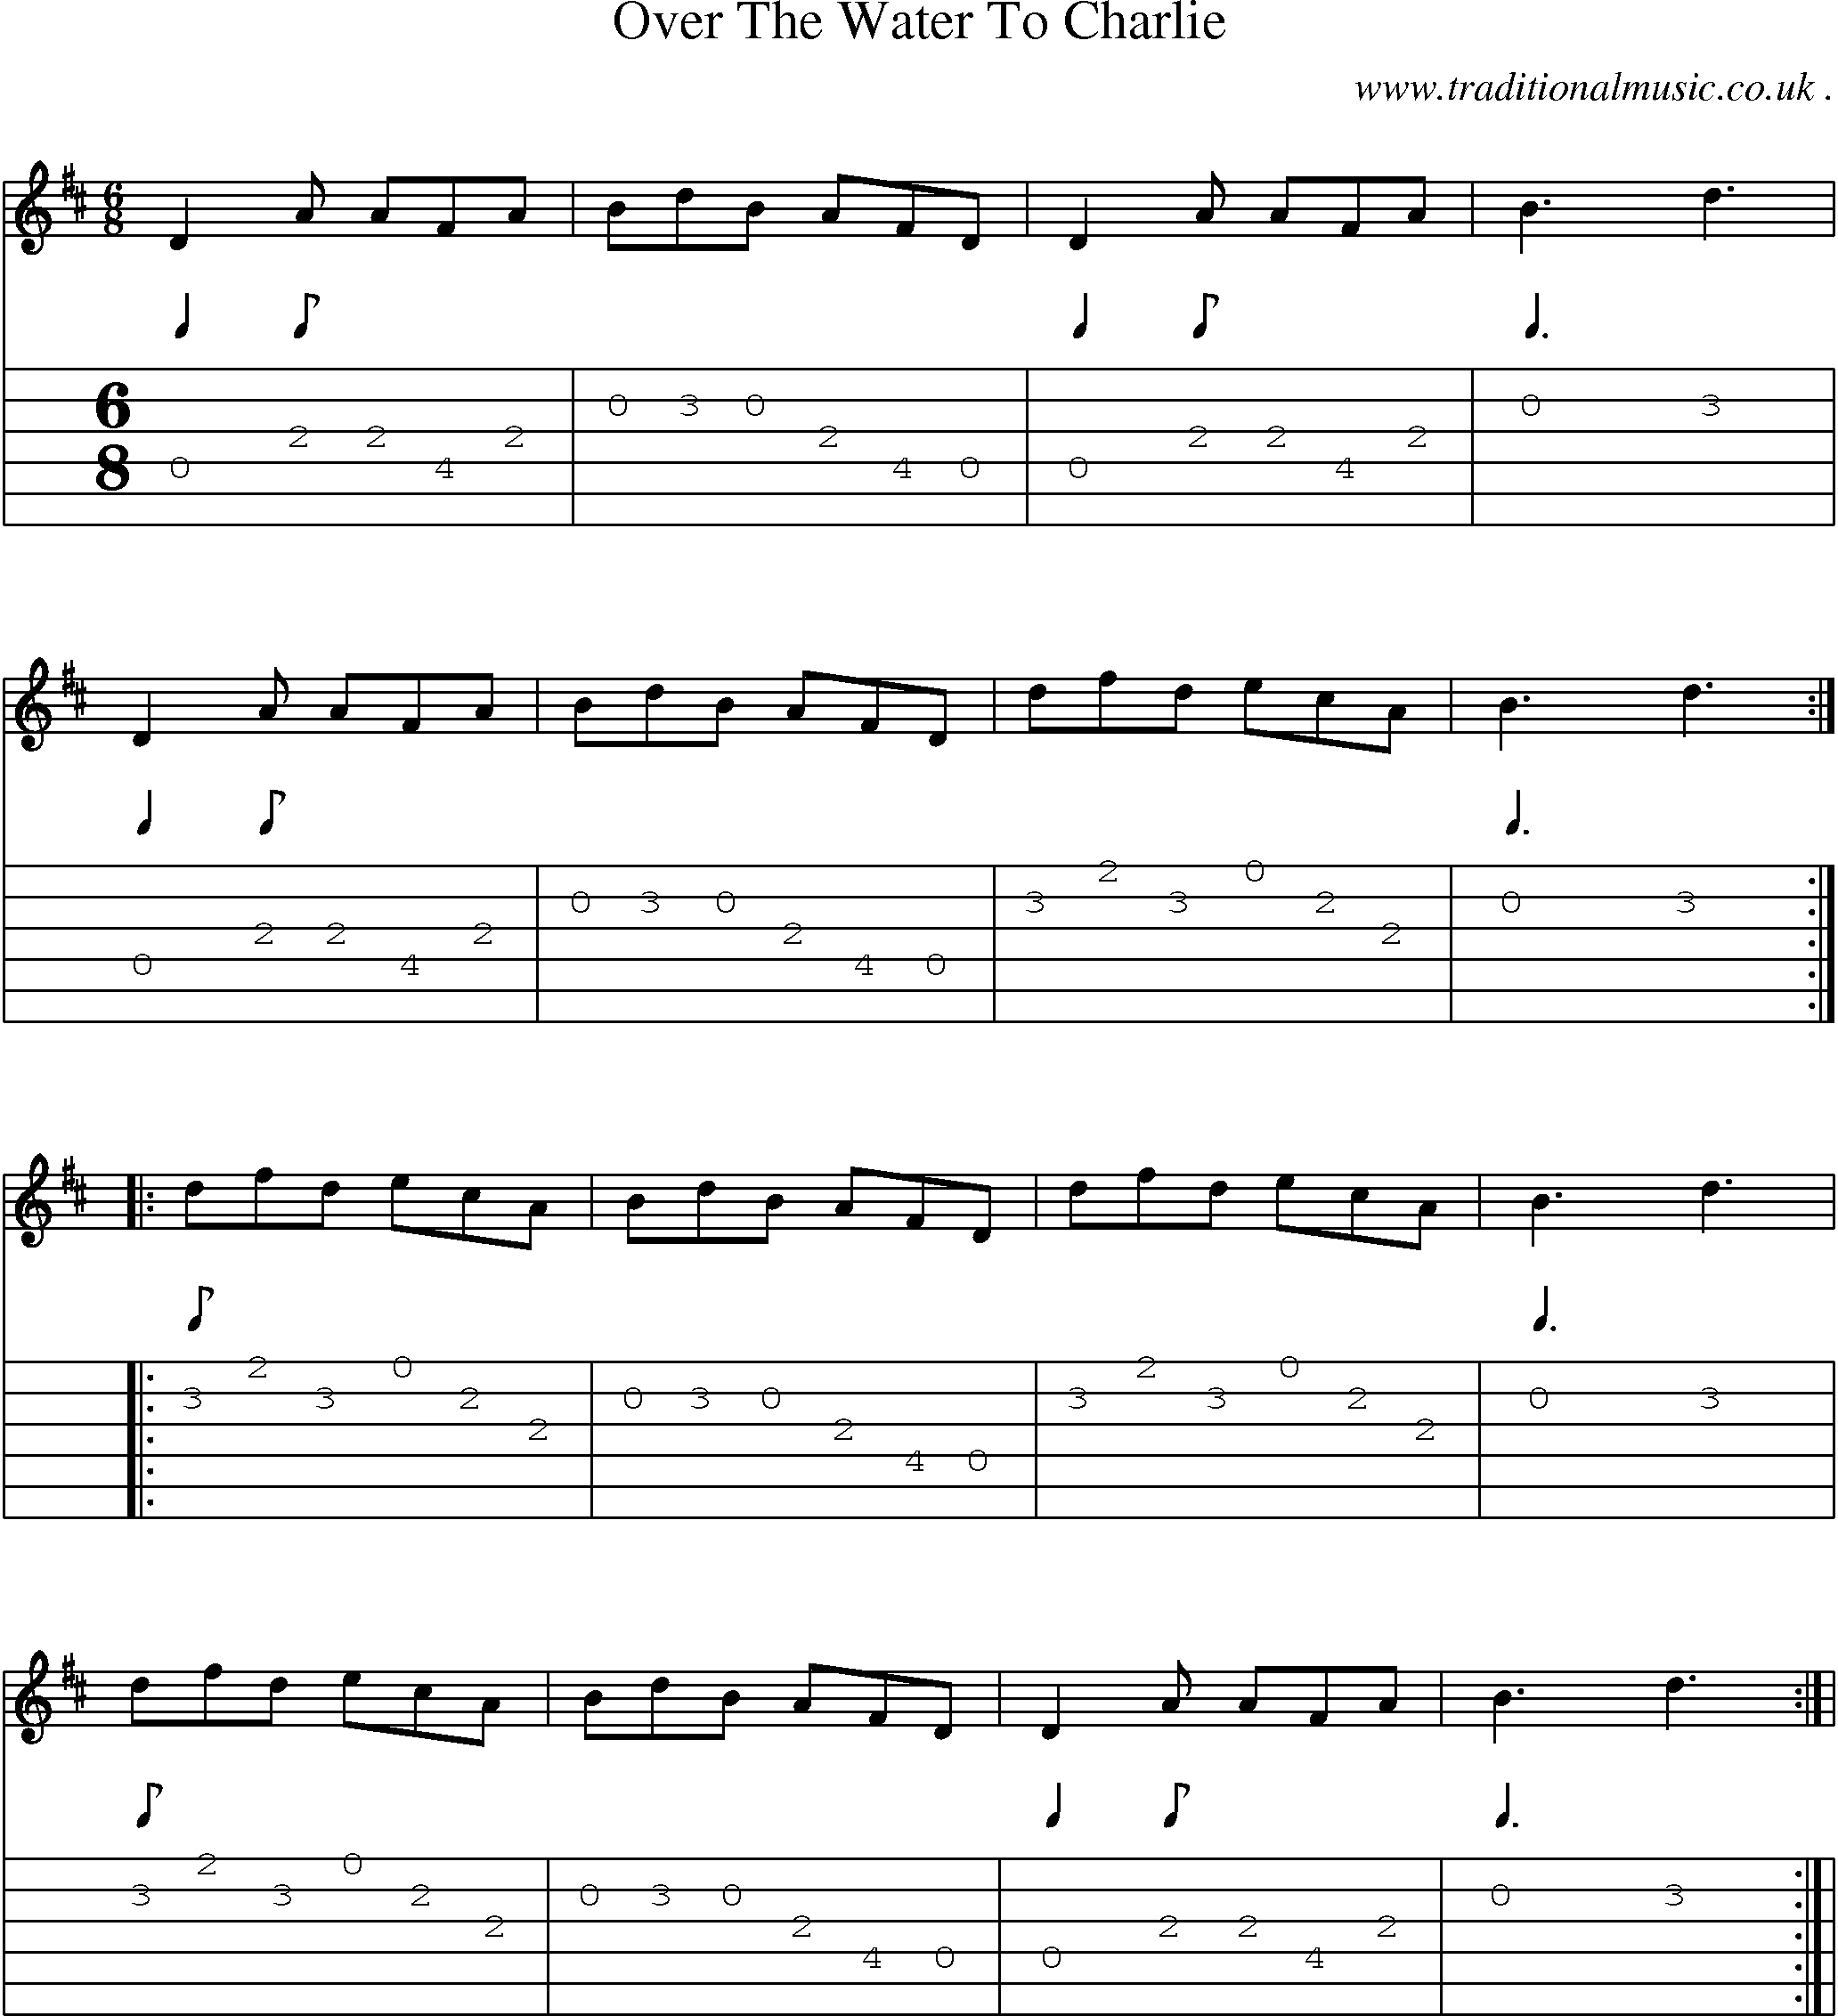 Sheet-Music and Guitar Tabs for Over The Water To Charlie